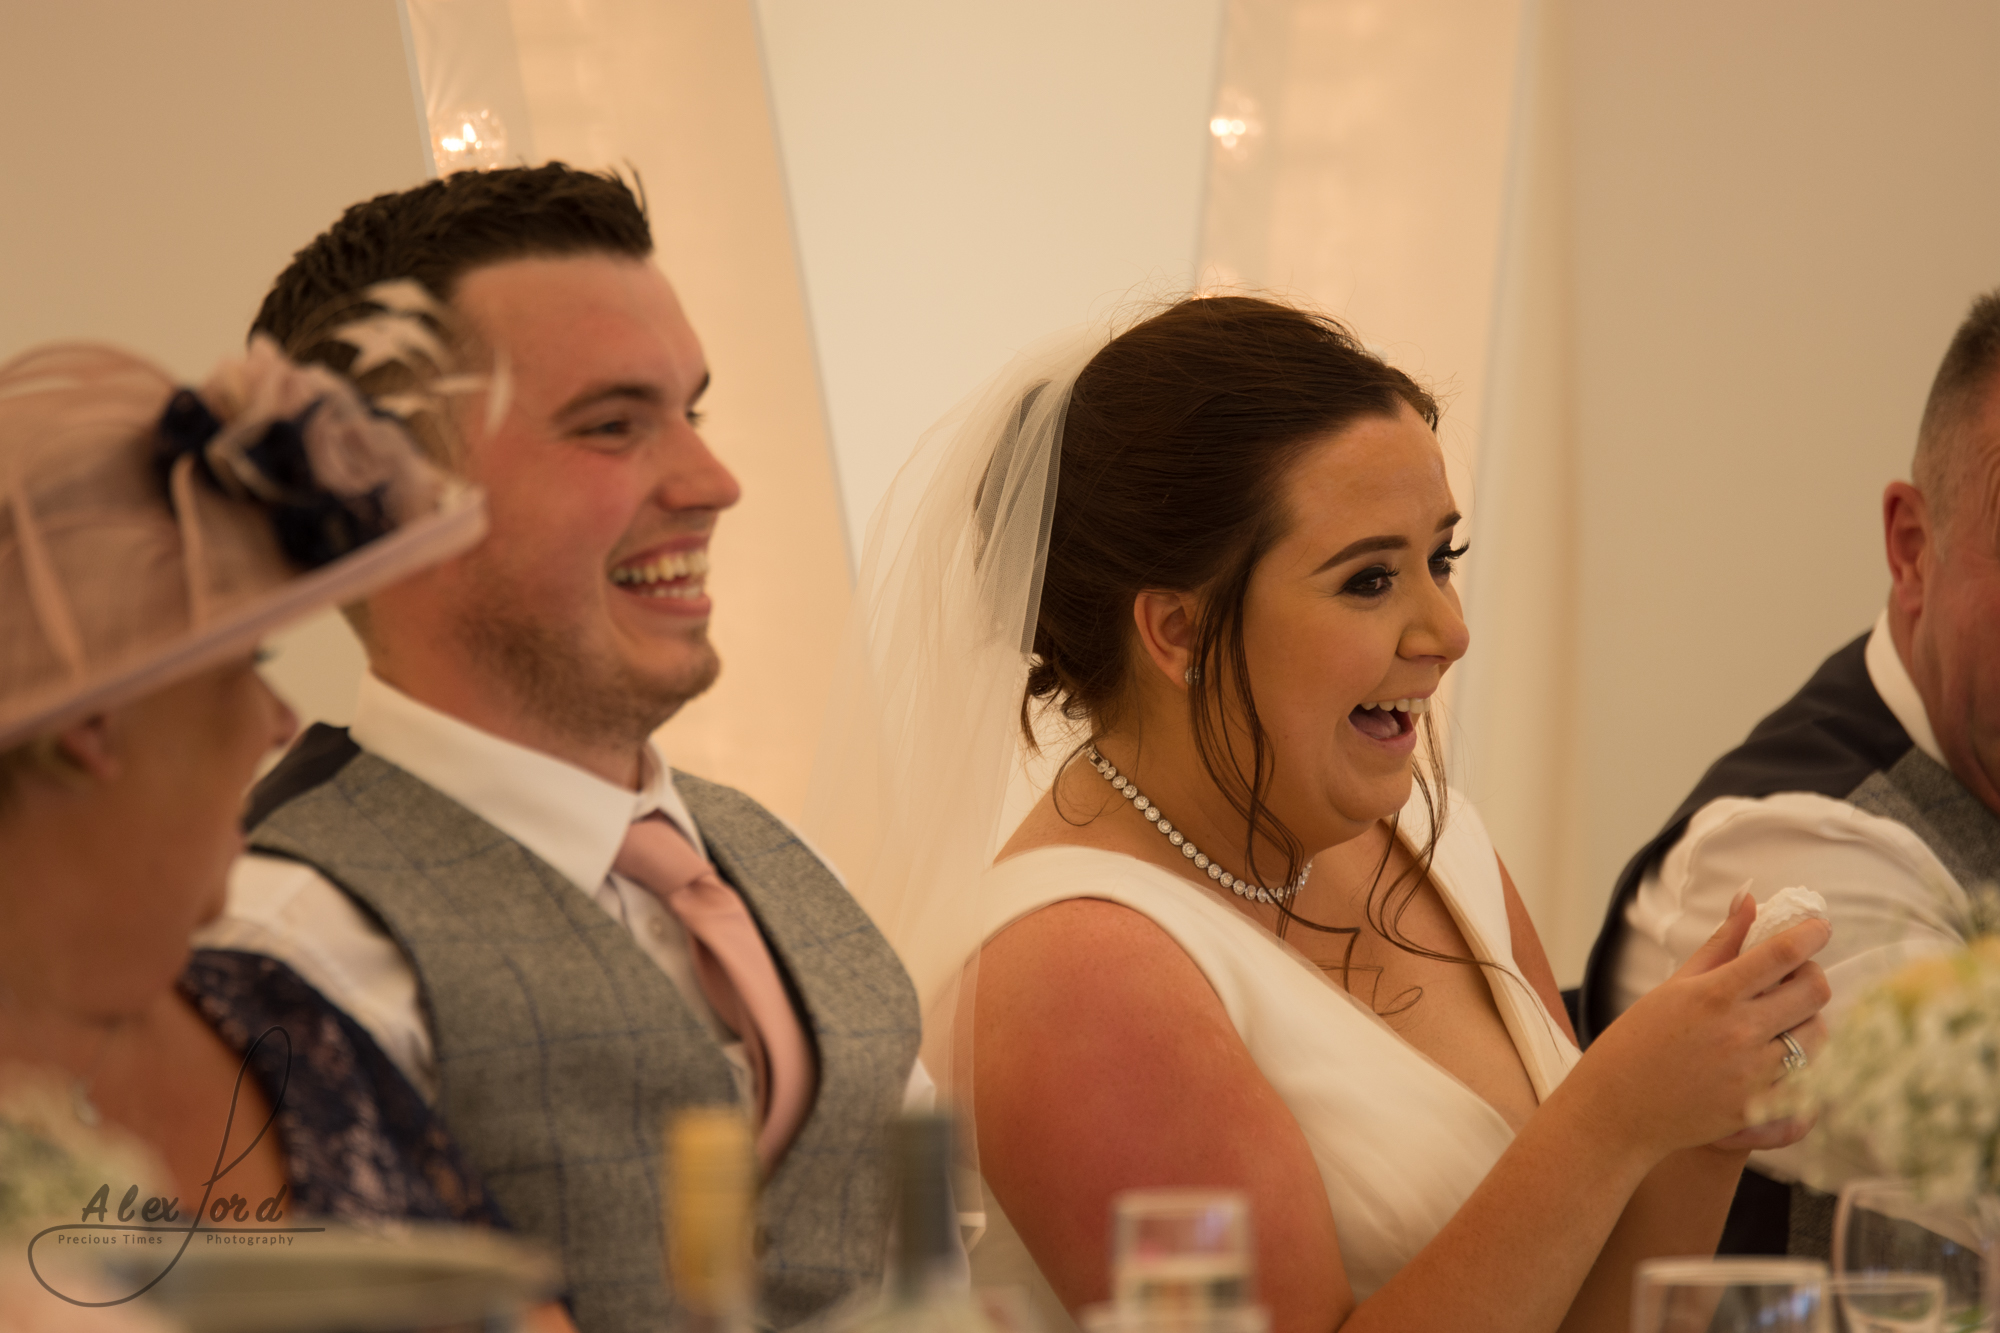 Bride and groom laugh out loud at a joke during the wedding speeches